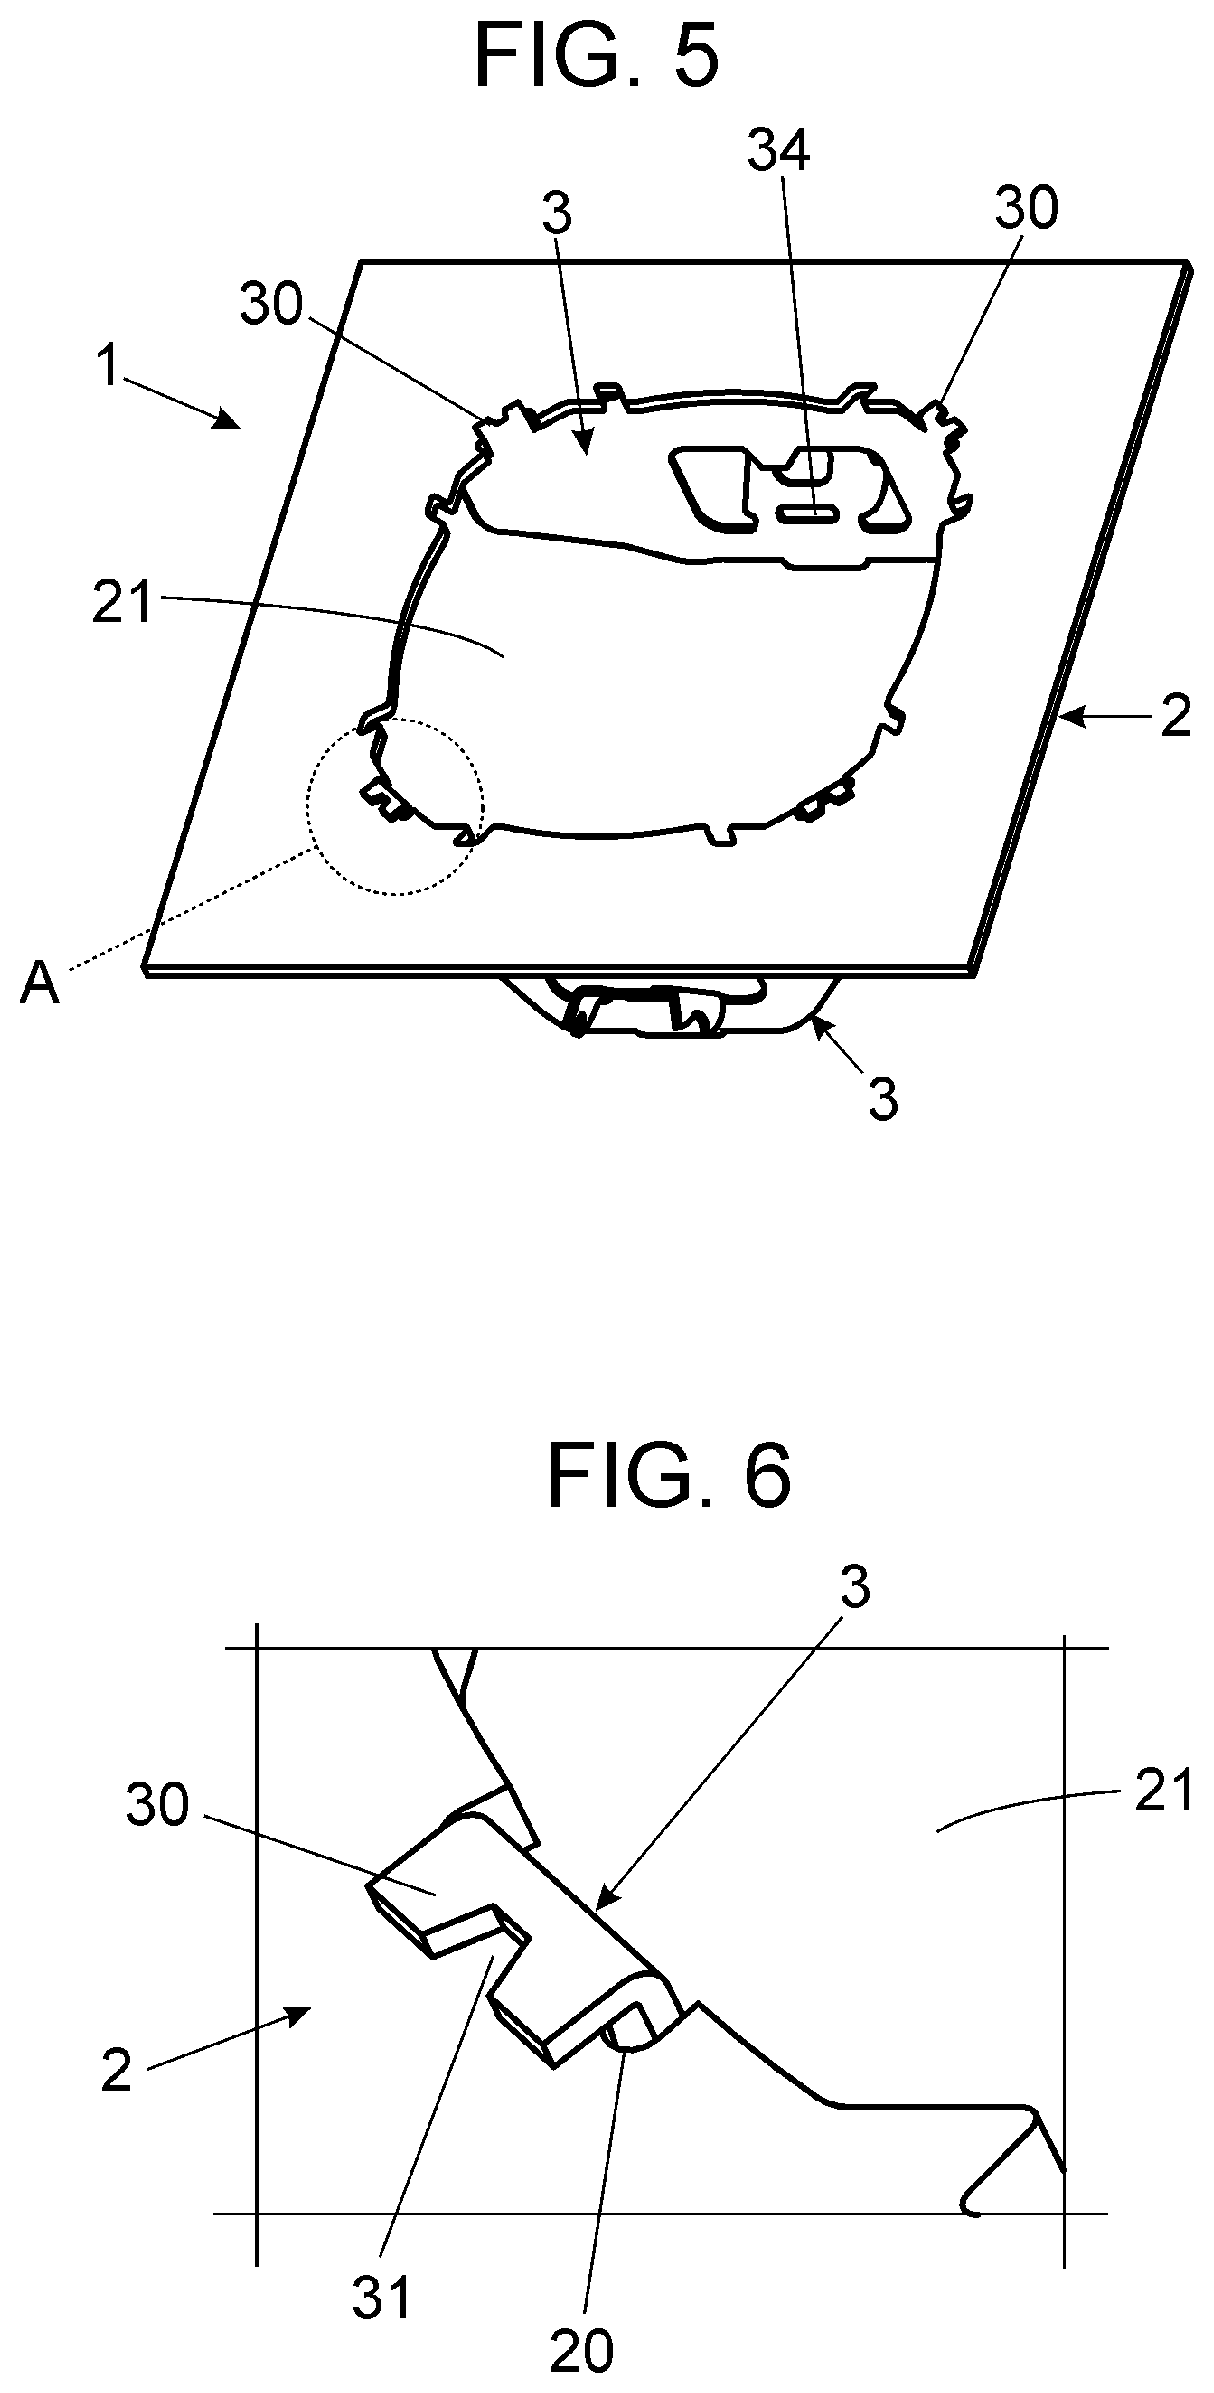 Fastening assembly for electric and/or electronic devices that can be built-in